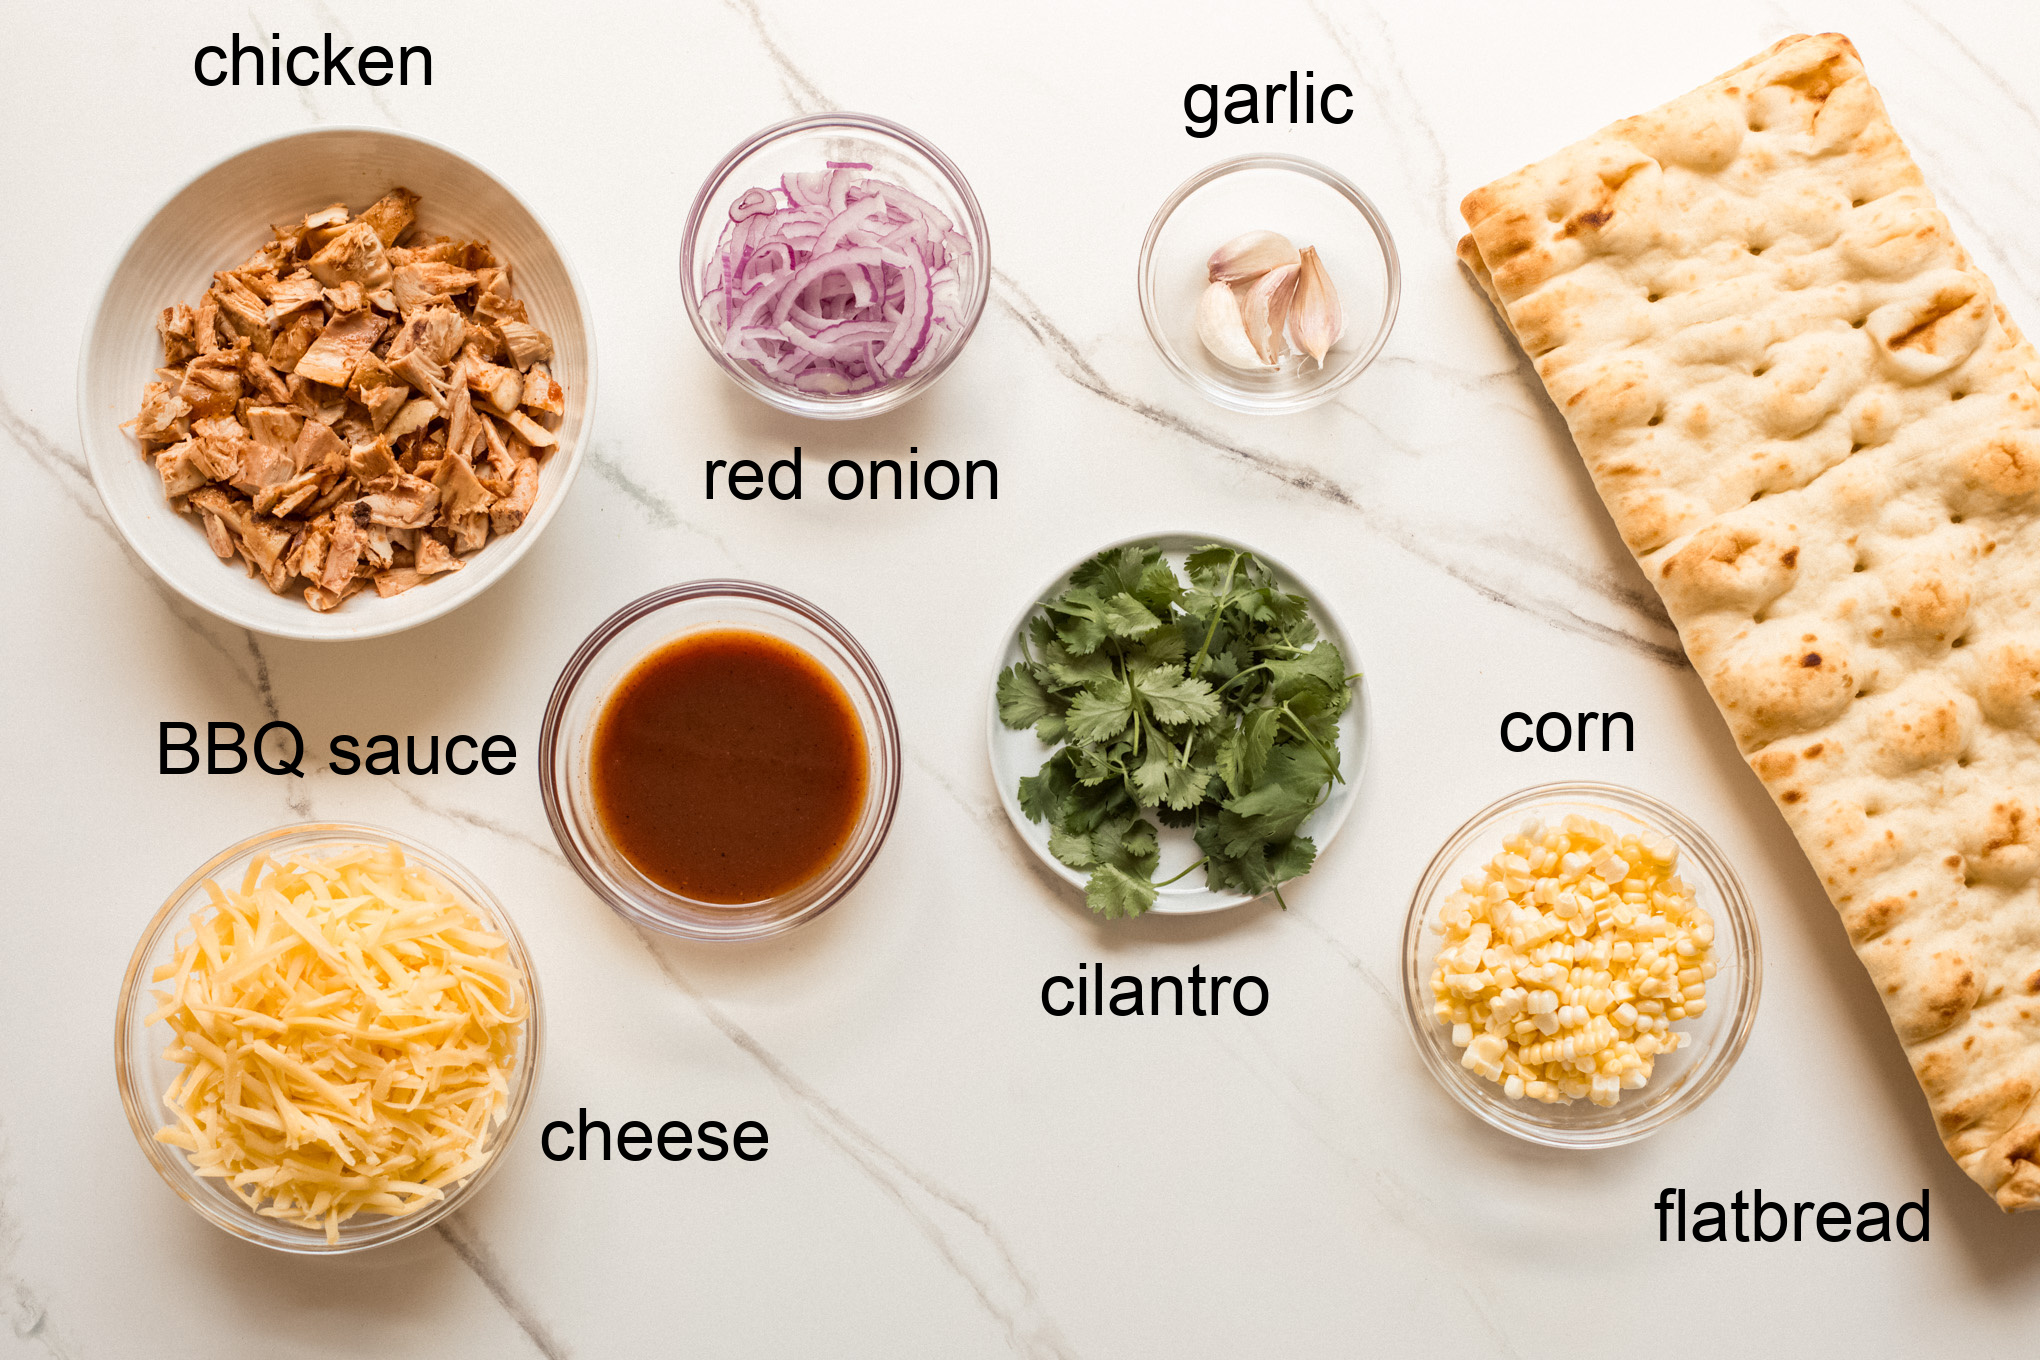 ingredients for barbecue flatbread.